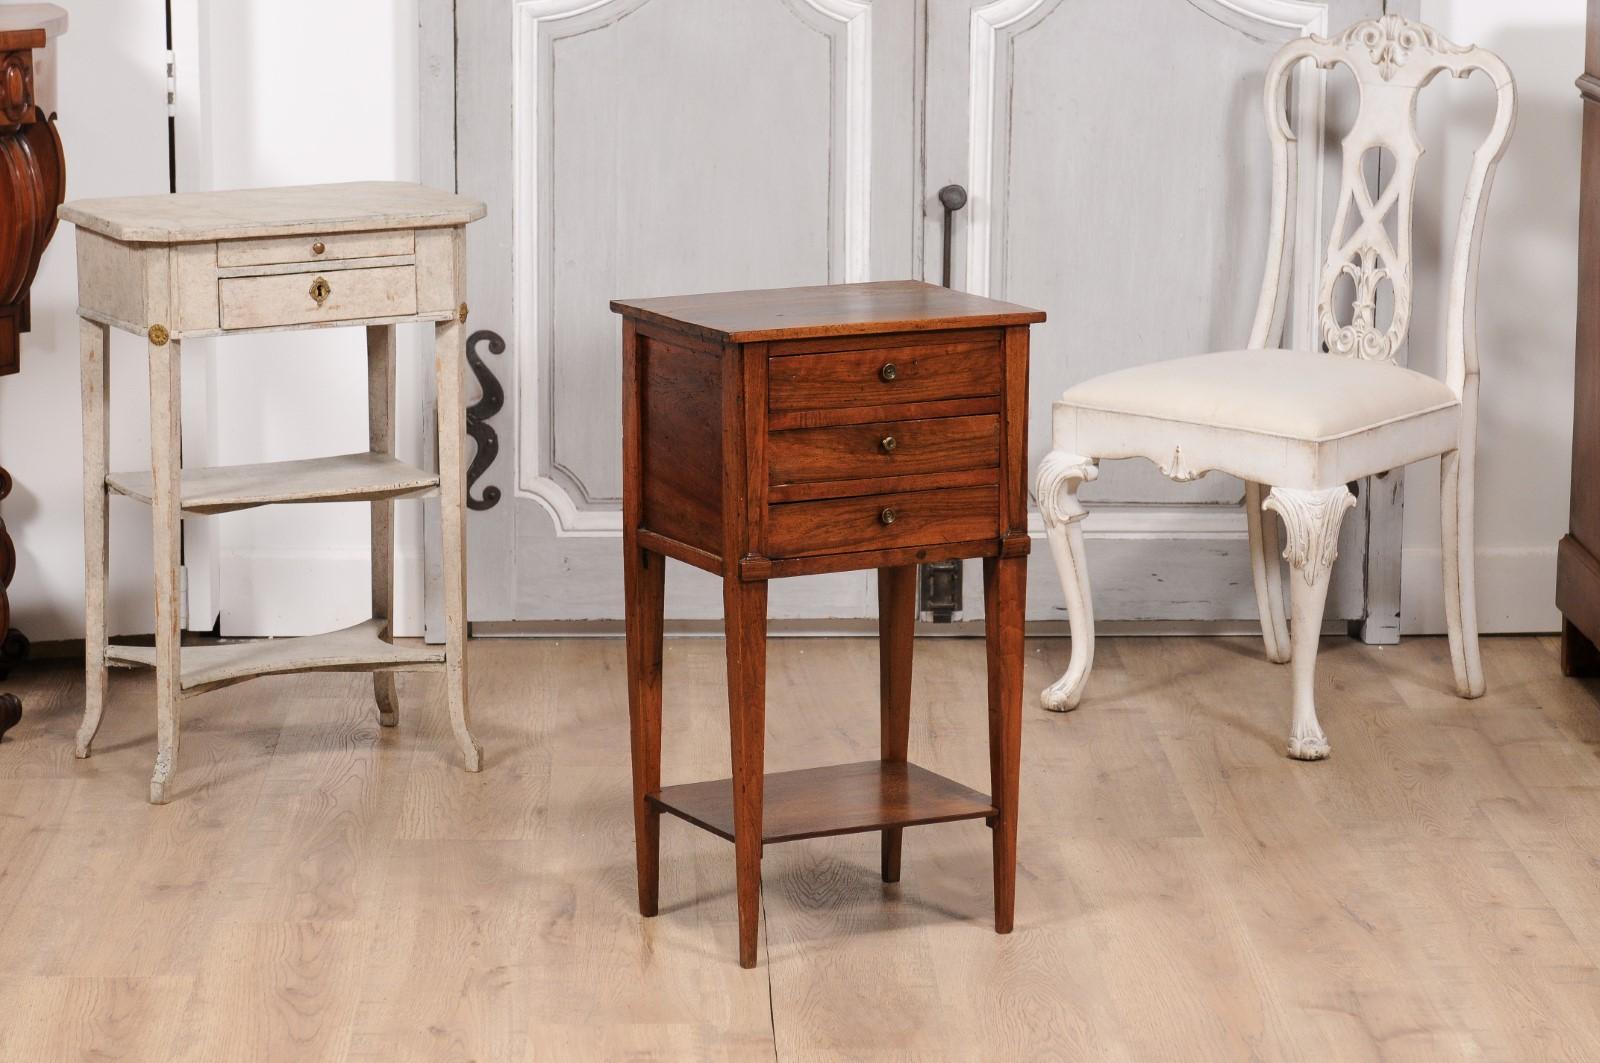 18th Century Italian Walnut Bedside Table with Three Drawers and Tapering Legs In Good Condition For Sale In Atlanta, GA